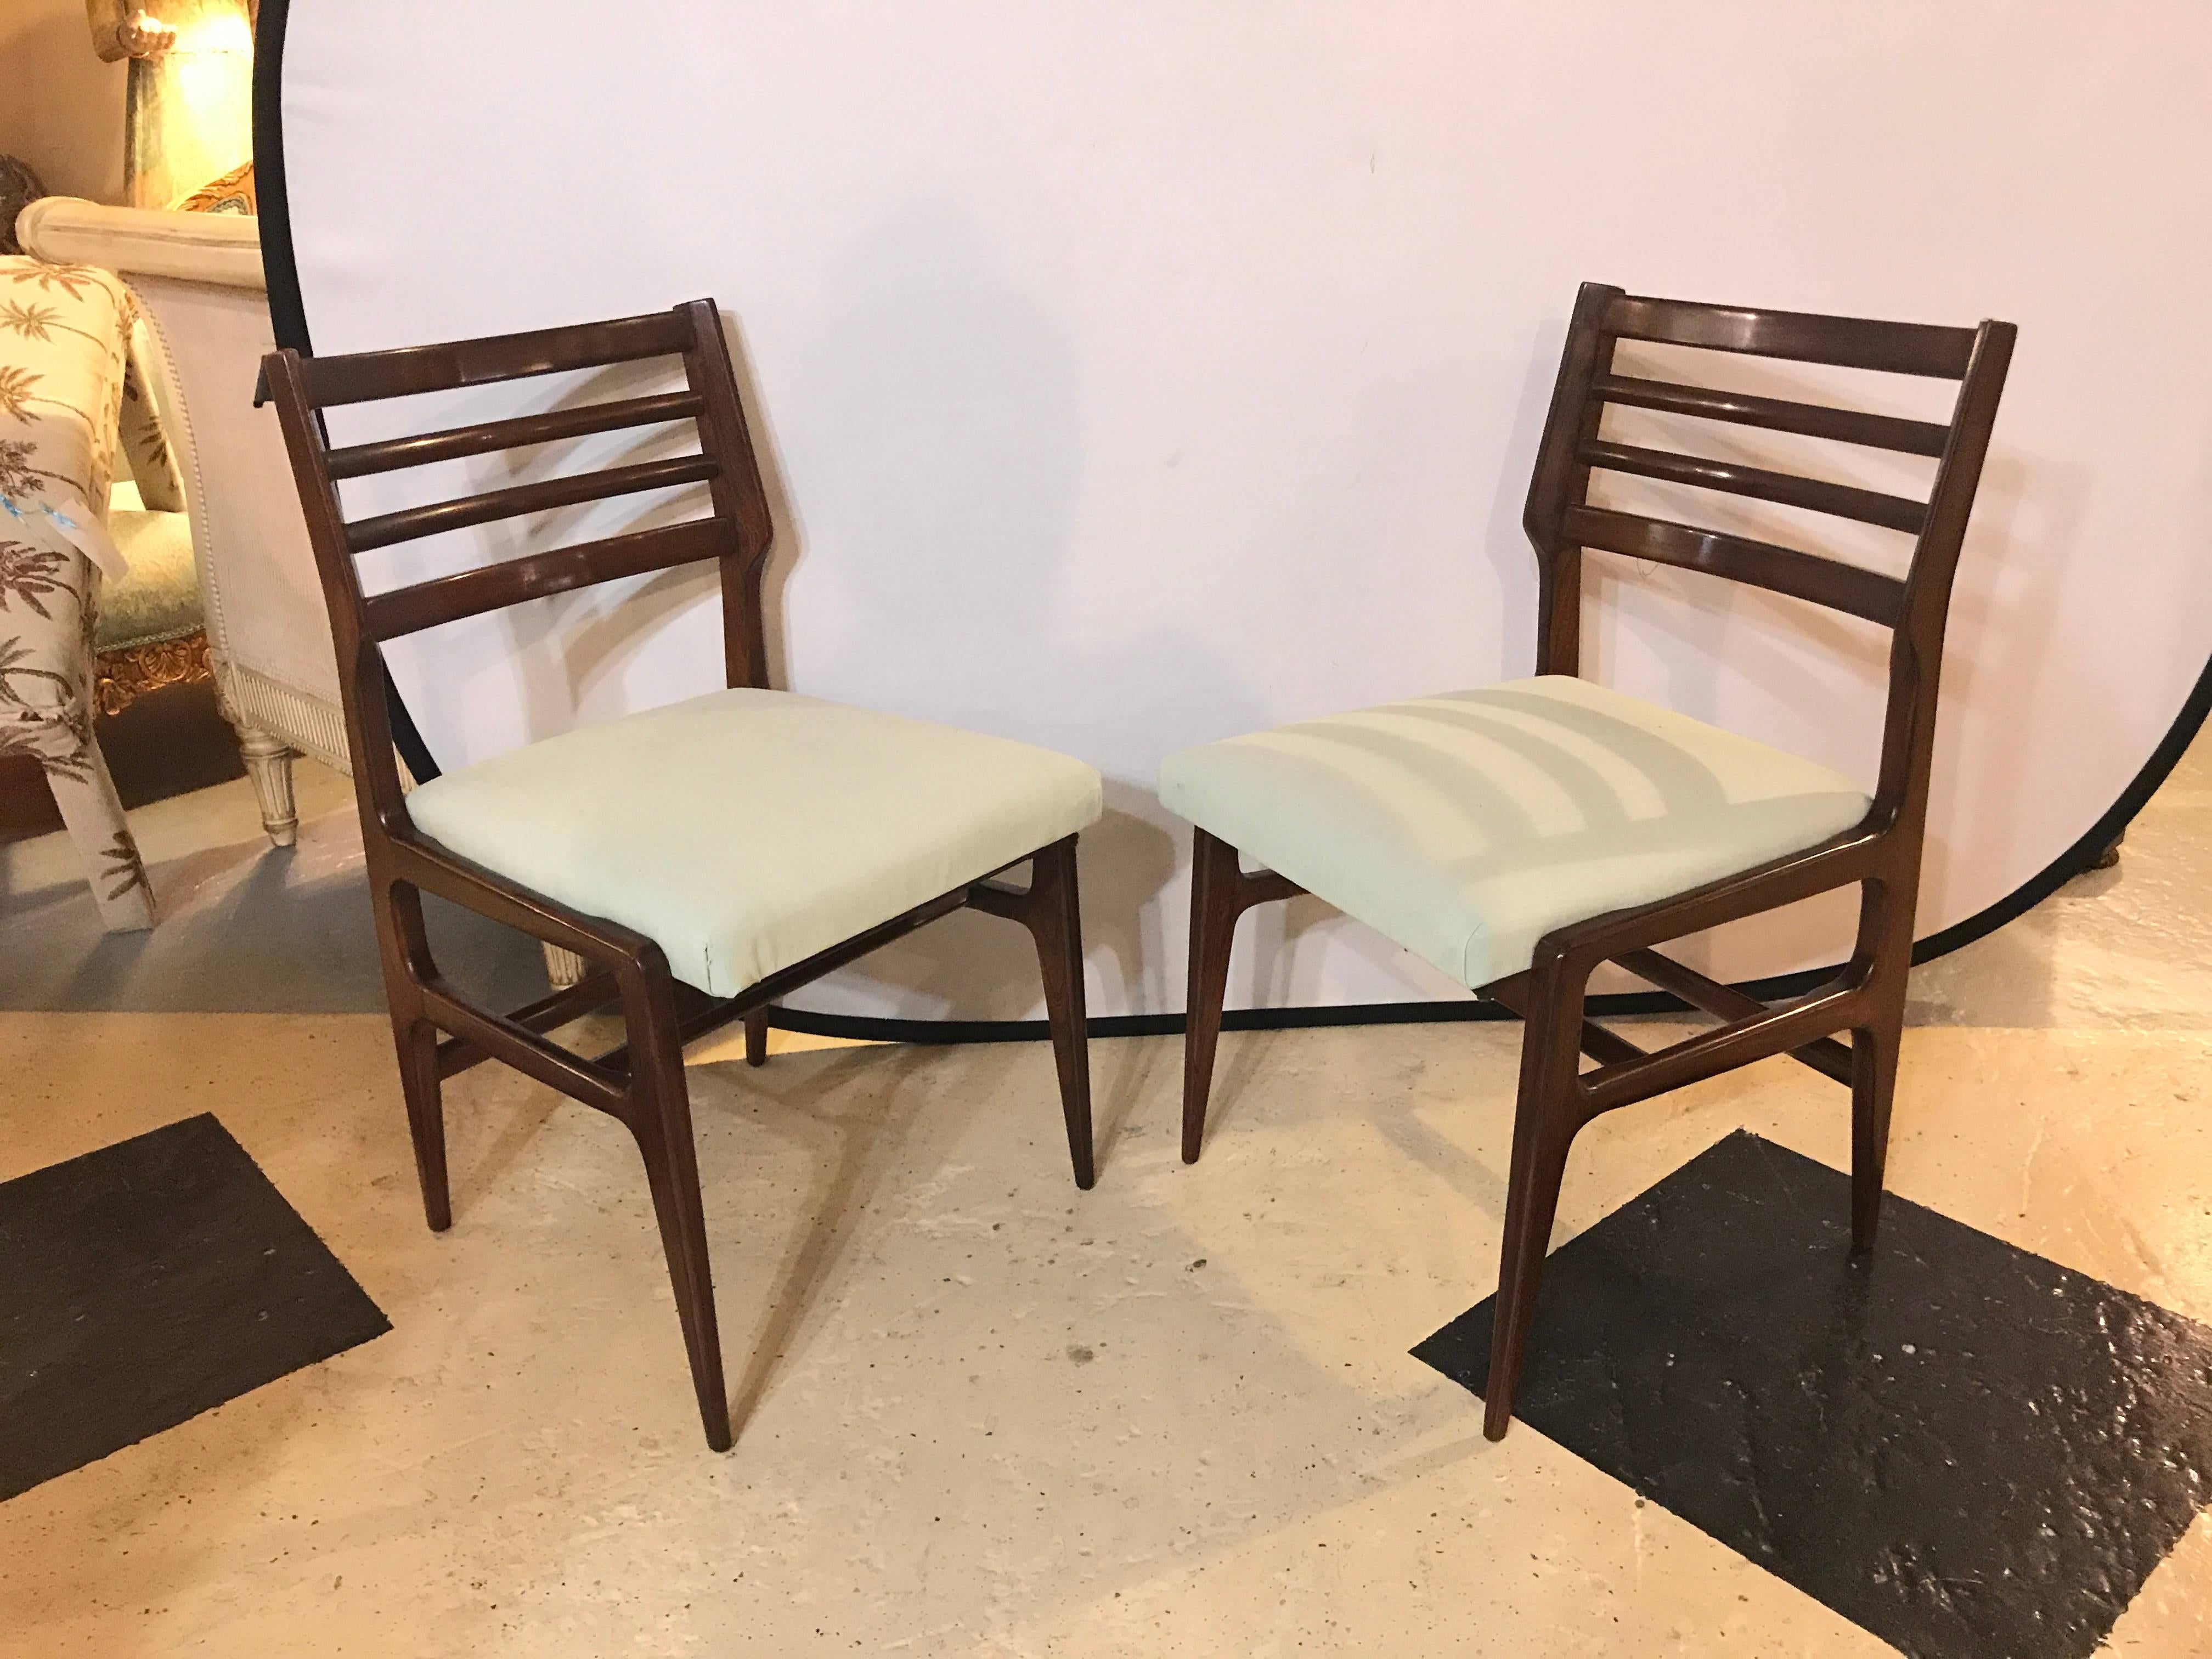 20th Century Set of Six Mid-Century Modern Rosewood Dining Chairs by R'way Furniture